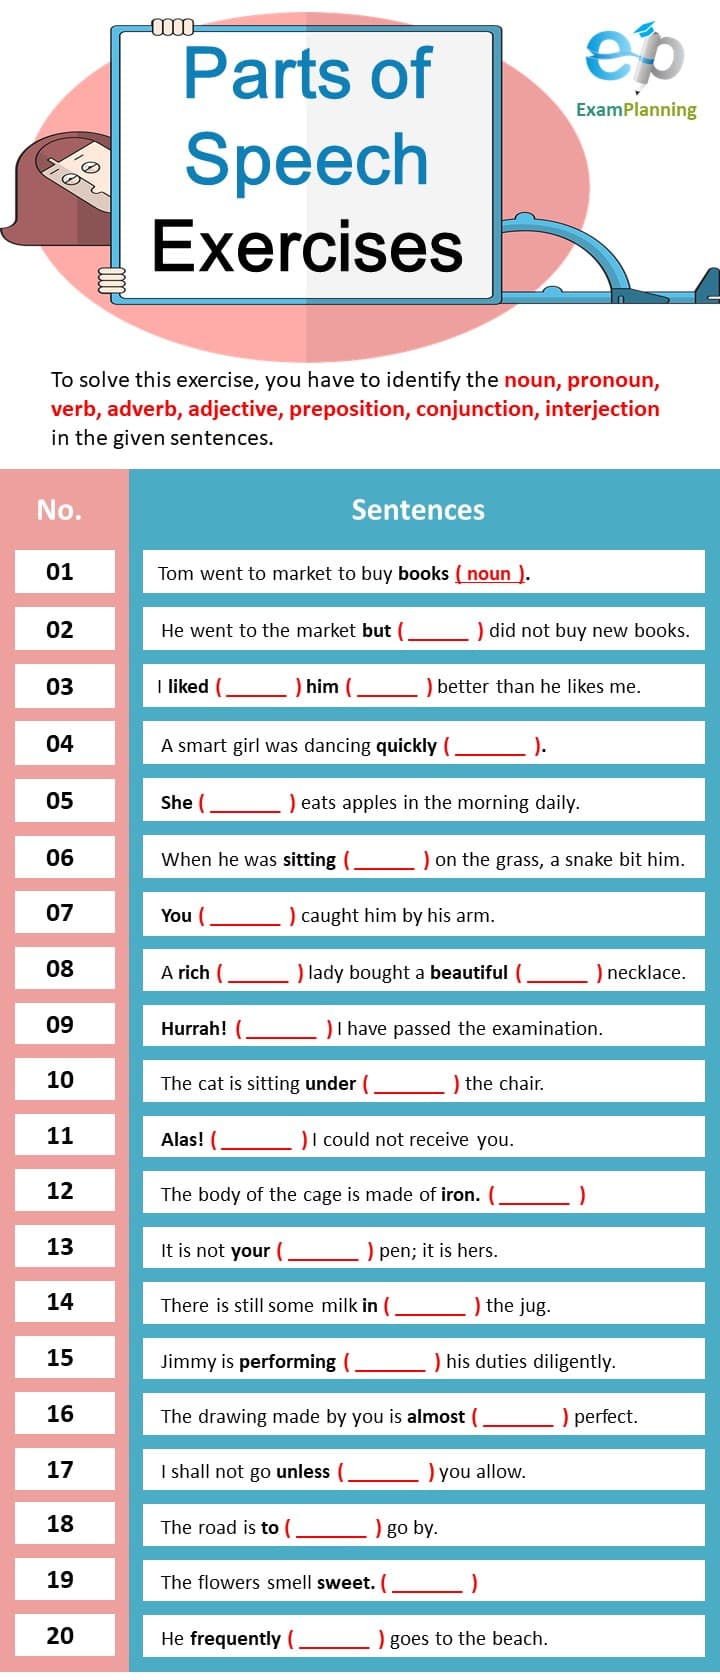 Parts of Speech Exercises - ExamPlanning % Pertaining To Part Of Speech Worksheet Pdf